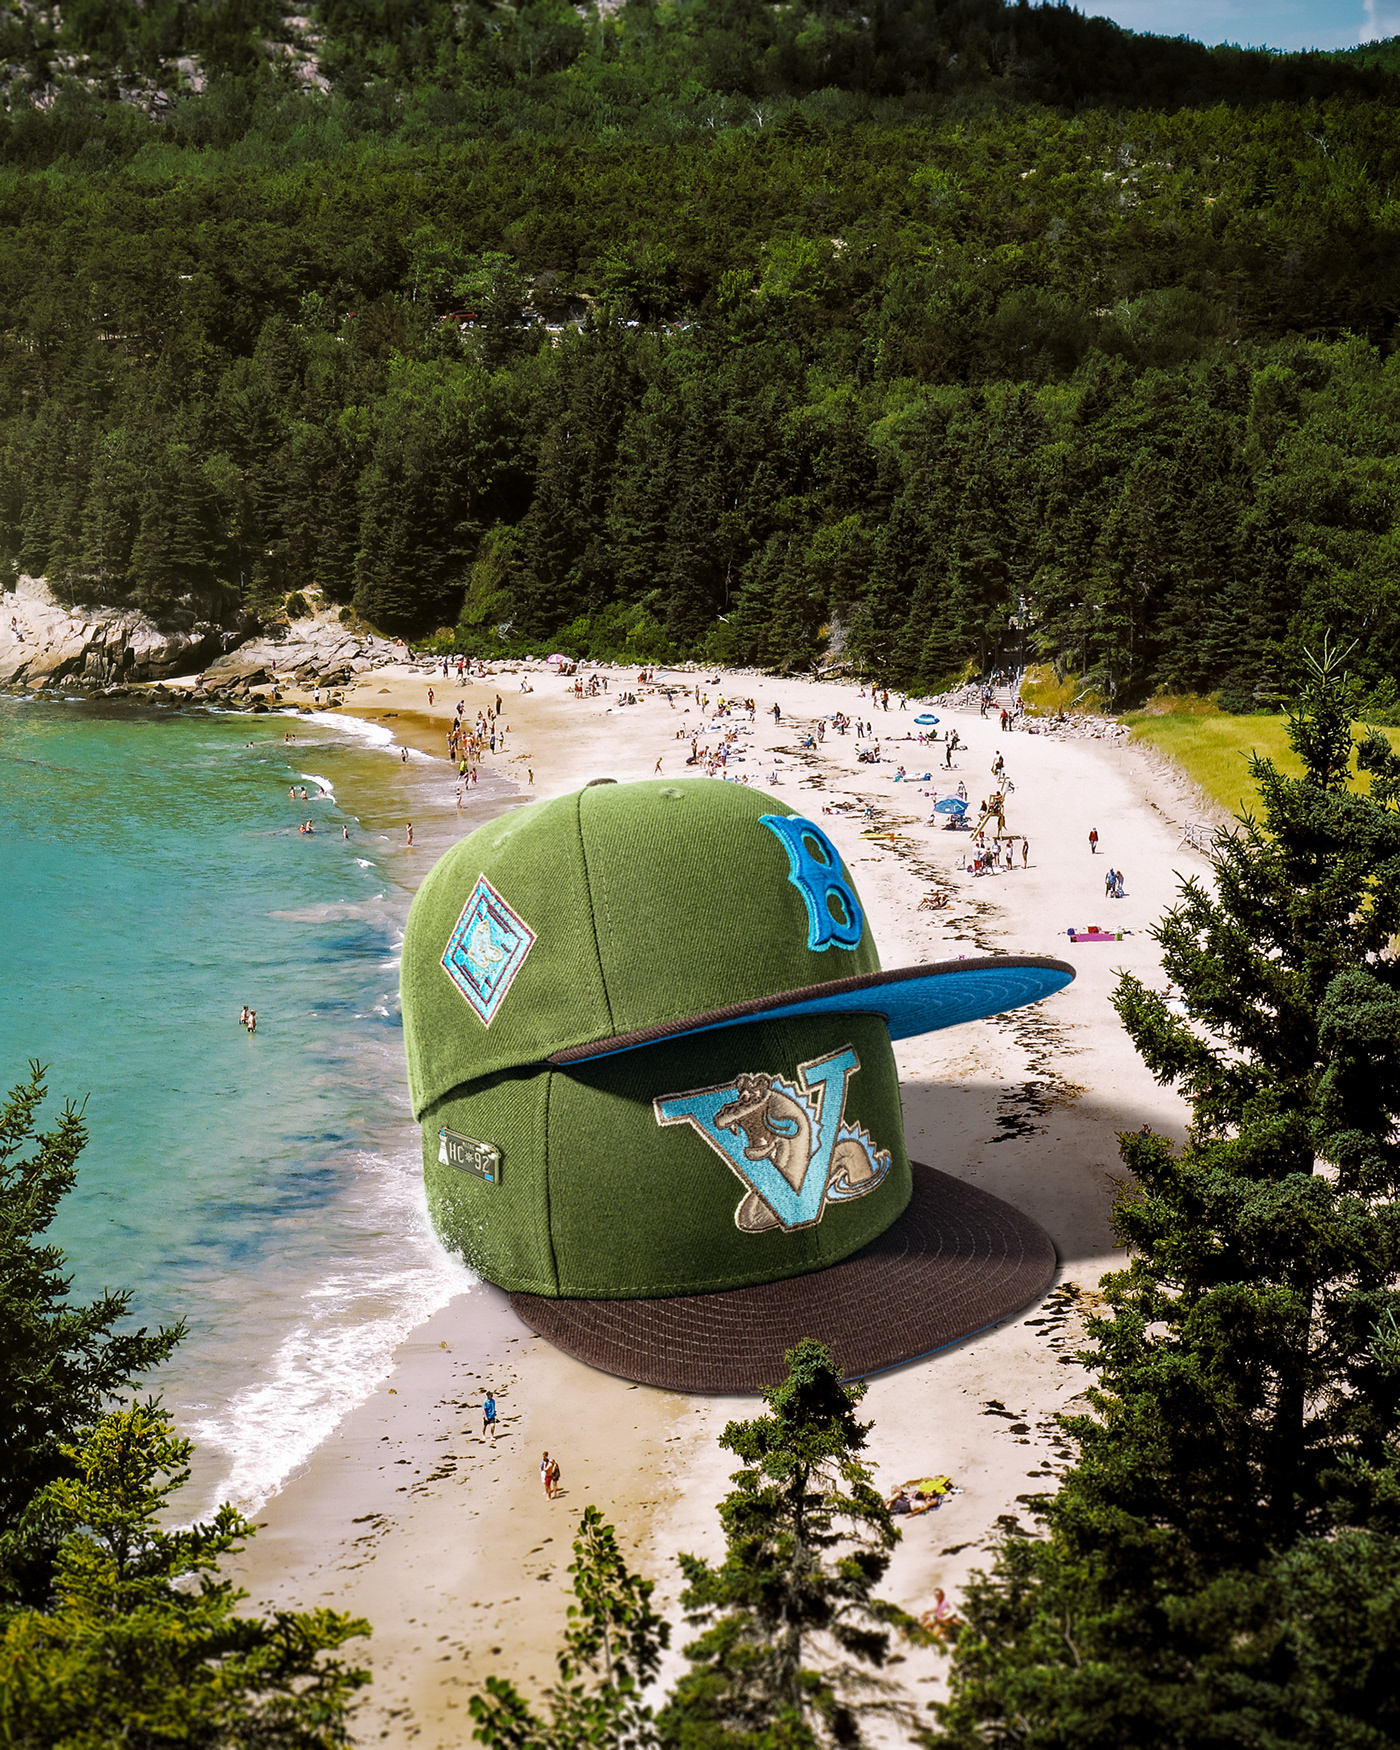 Photo composite of giant baseball hat in nature. Retouching using Photoshop
